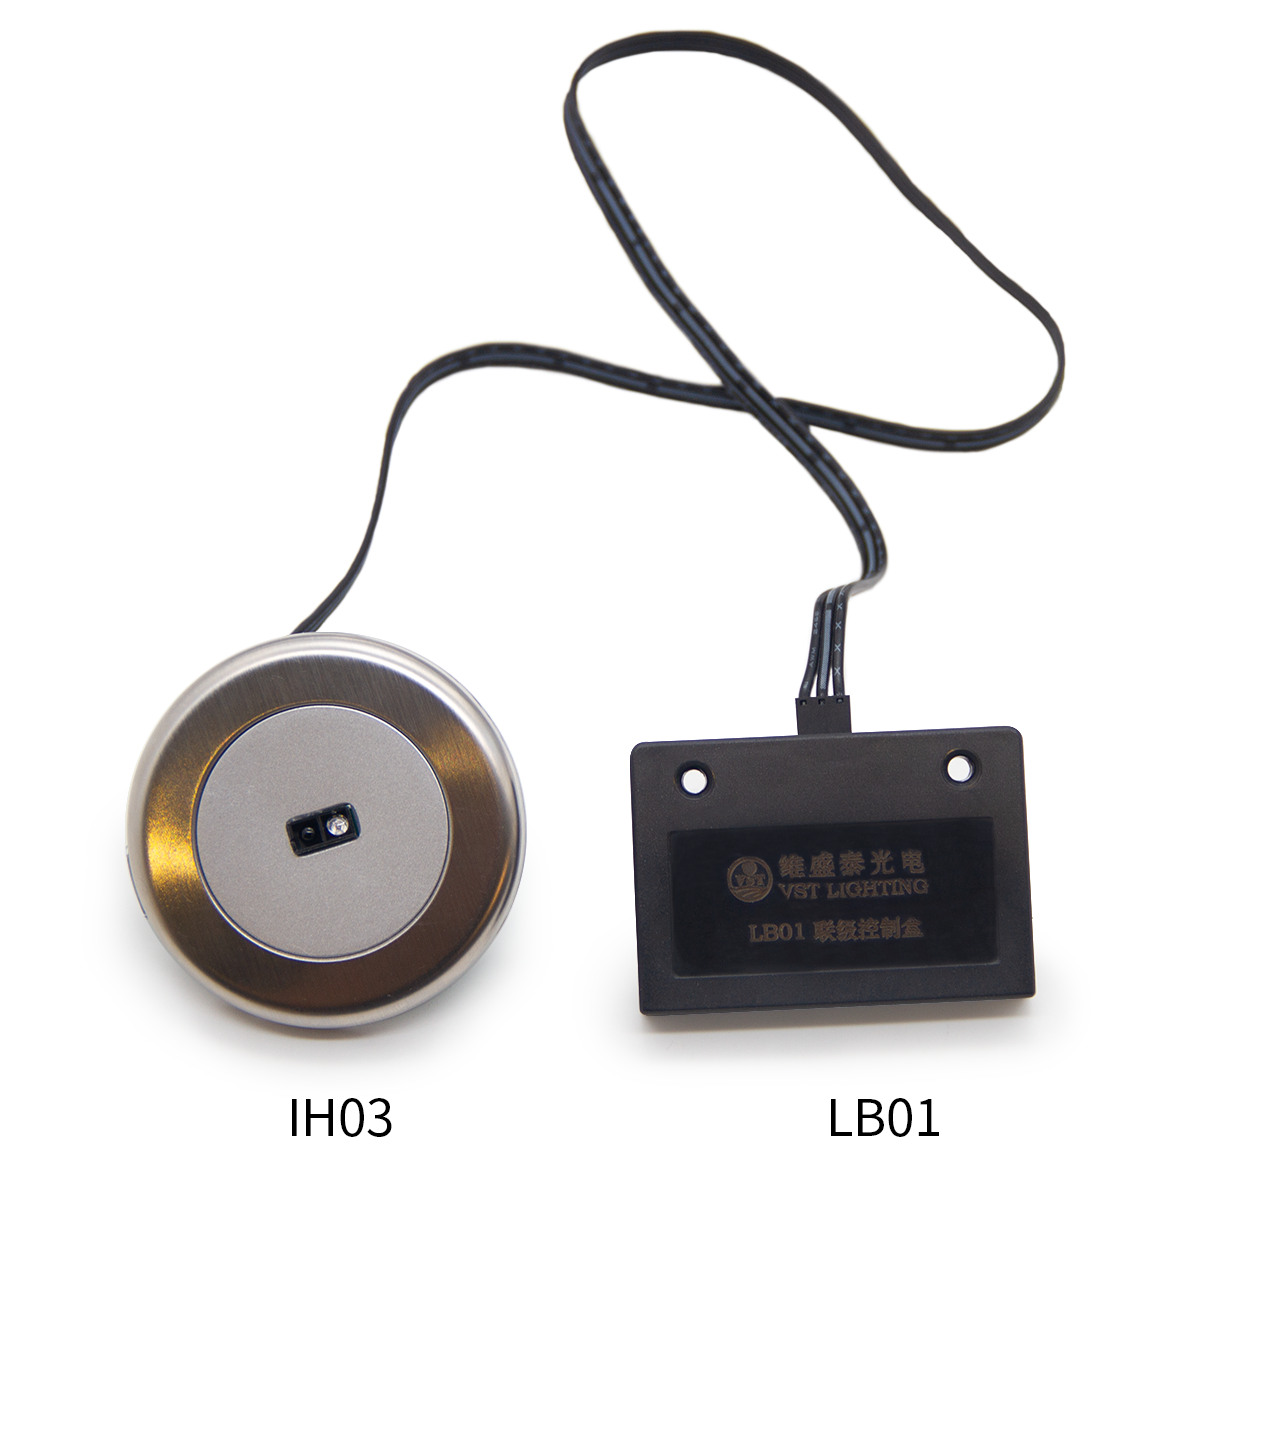 Send inquiry for 12V IR Hand Wave Sensor Switch 30W High Quality Home Light Switch to high quality IR Hand Wave Sensor Switch supplier. Wholesale Home Light Switch directly from China IR Hand Wave Sensor Switch manufacturers/exporters. Get a factory sale price list and become a distributor/agent-vstled.com.